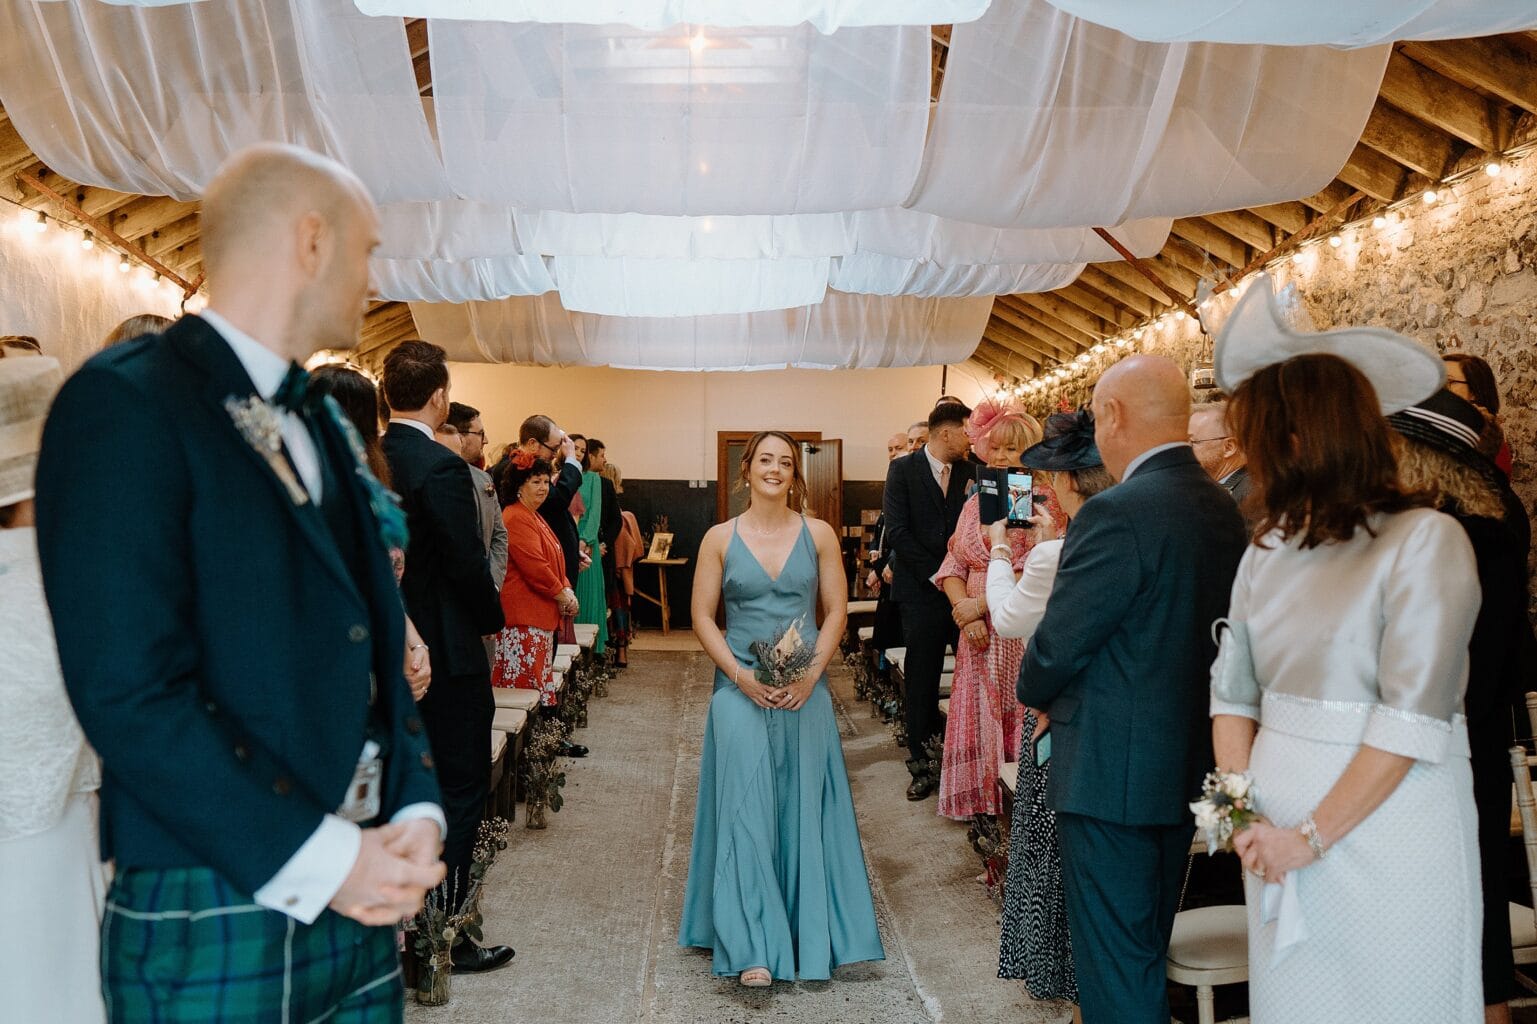 a bridesmaid in a blue dress walks up the aisle as guests look on underneath white drapes hanging from the ceiling in one of the best farm wedding venues in scotland